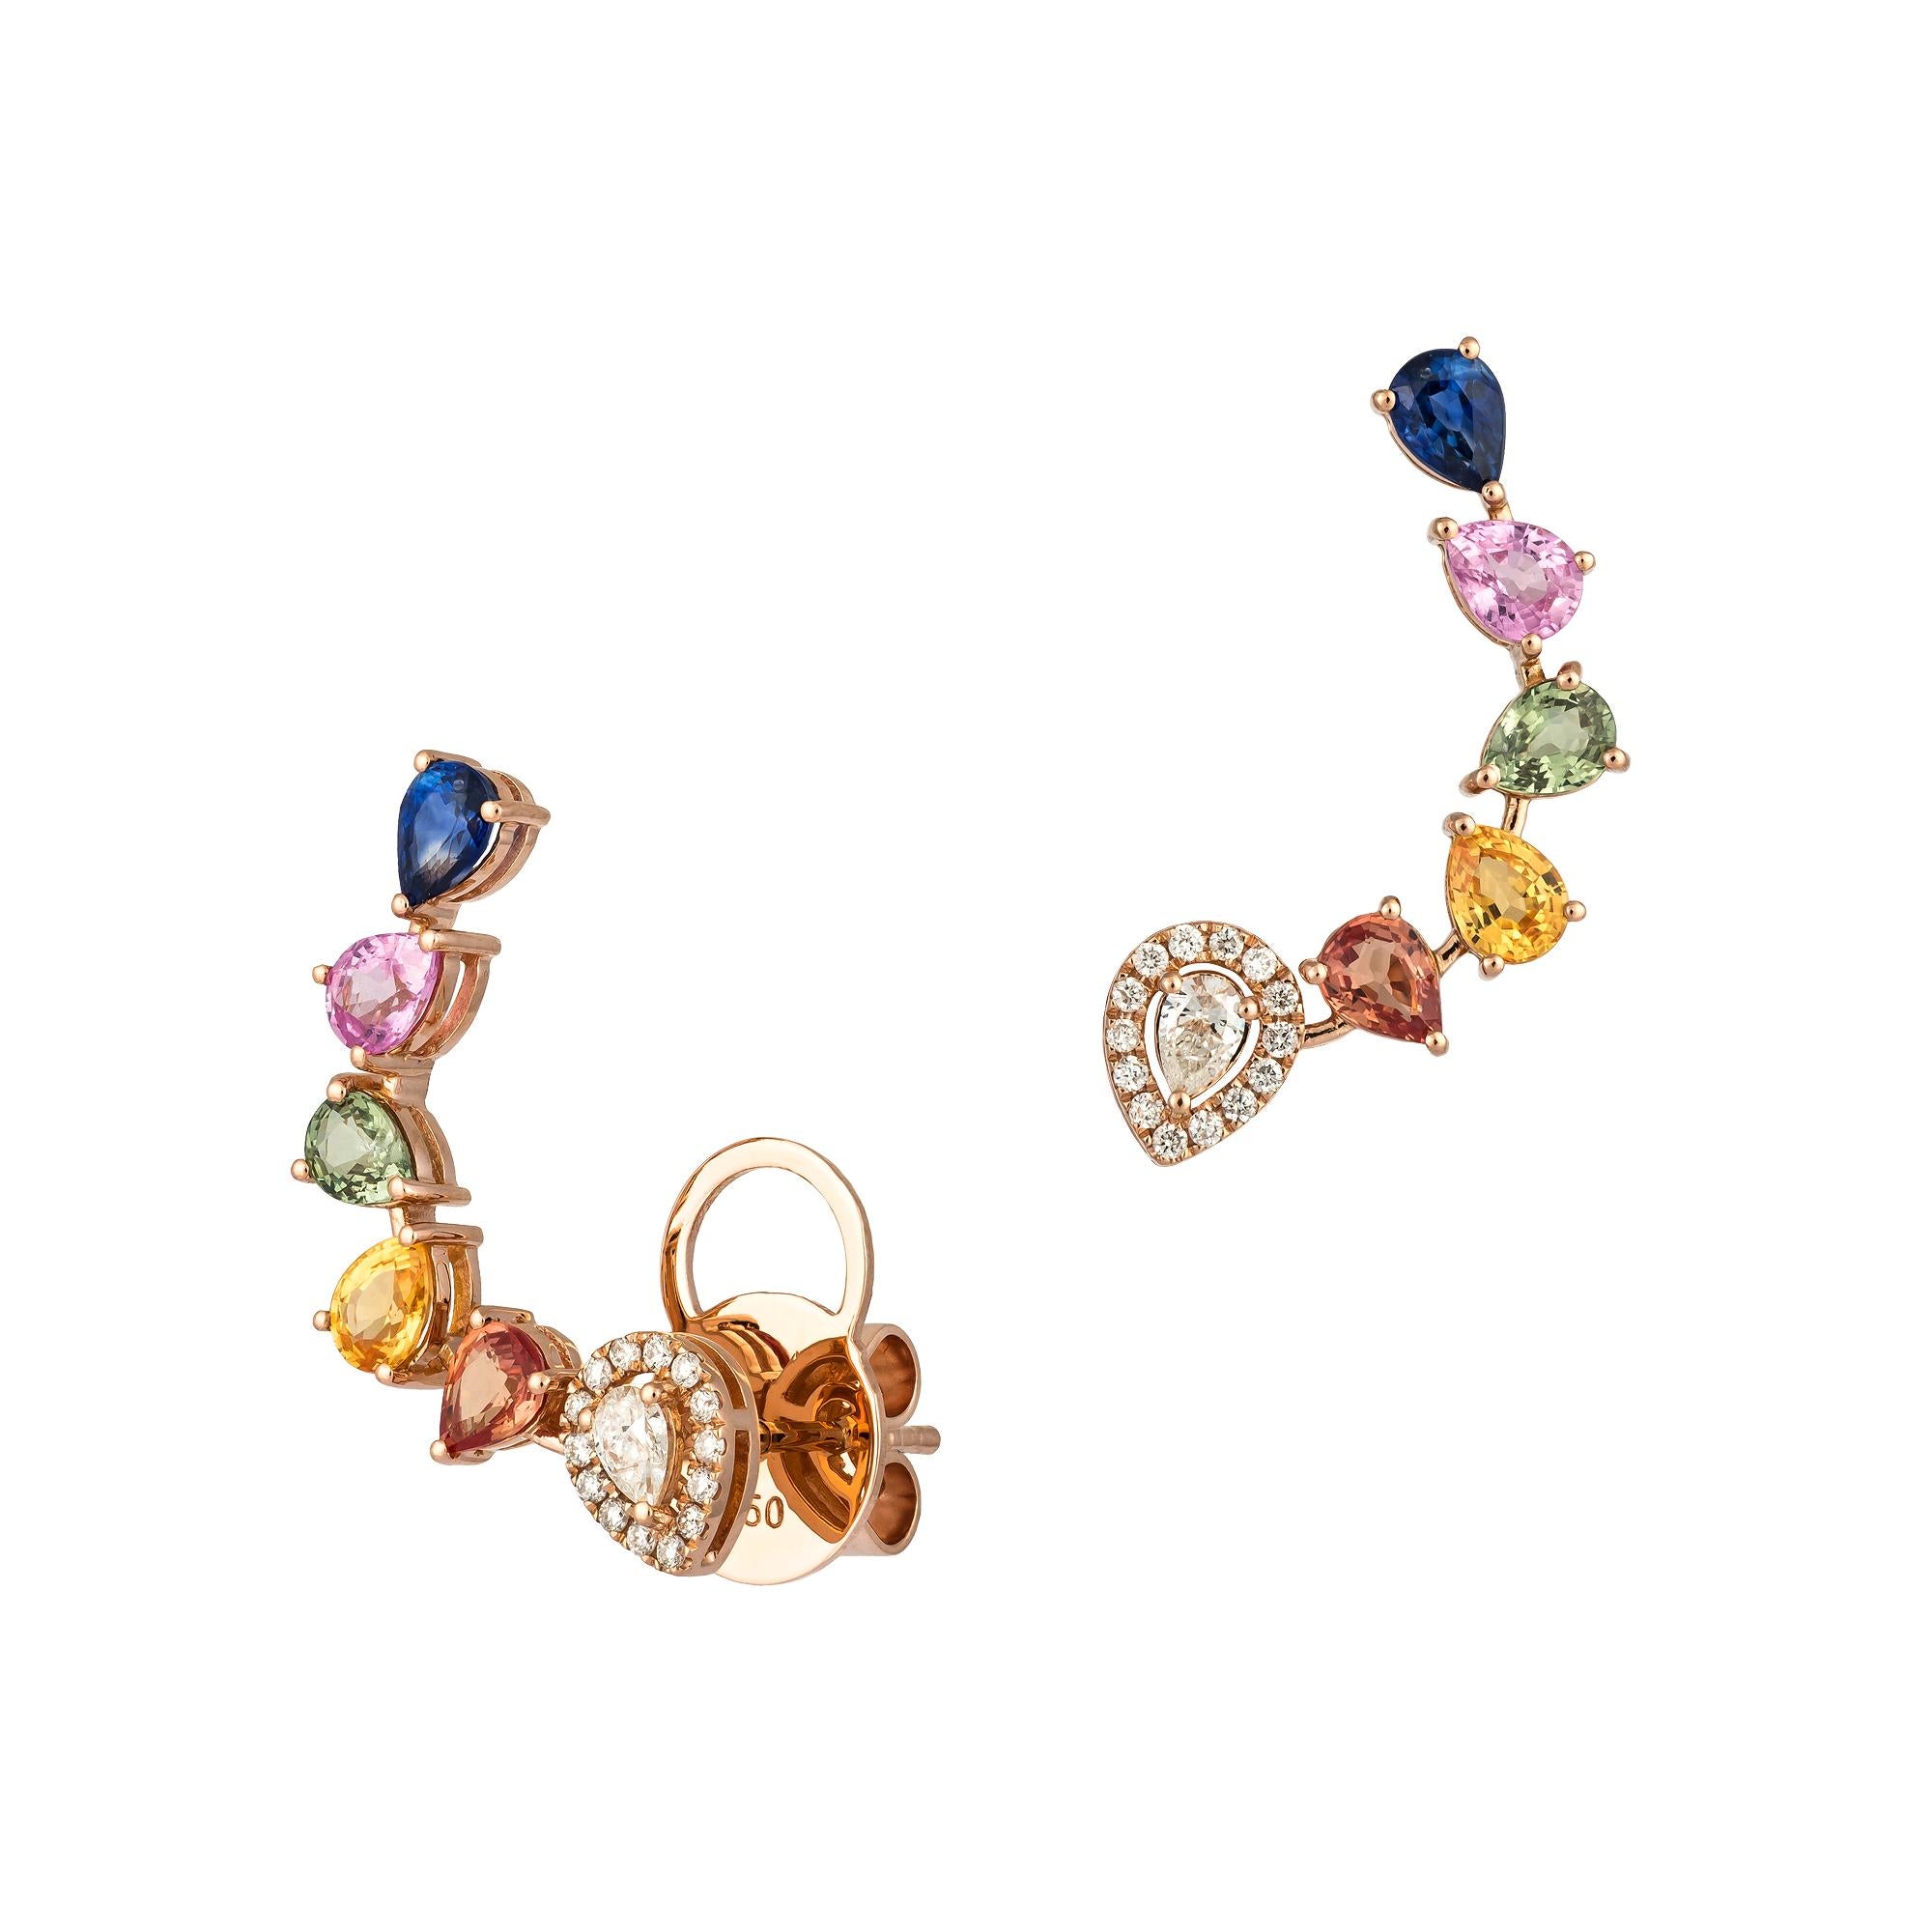 EARRING 18K Rose Gold Diamond 0.10 Cts/28 Pieces, Multi Sapphire 1.85 Cts/10 Pieces, PE 0.14 Cts/2 Pieces
